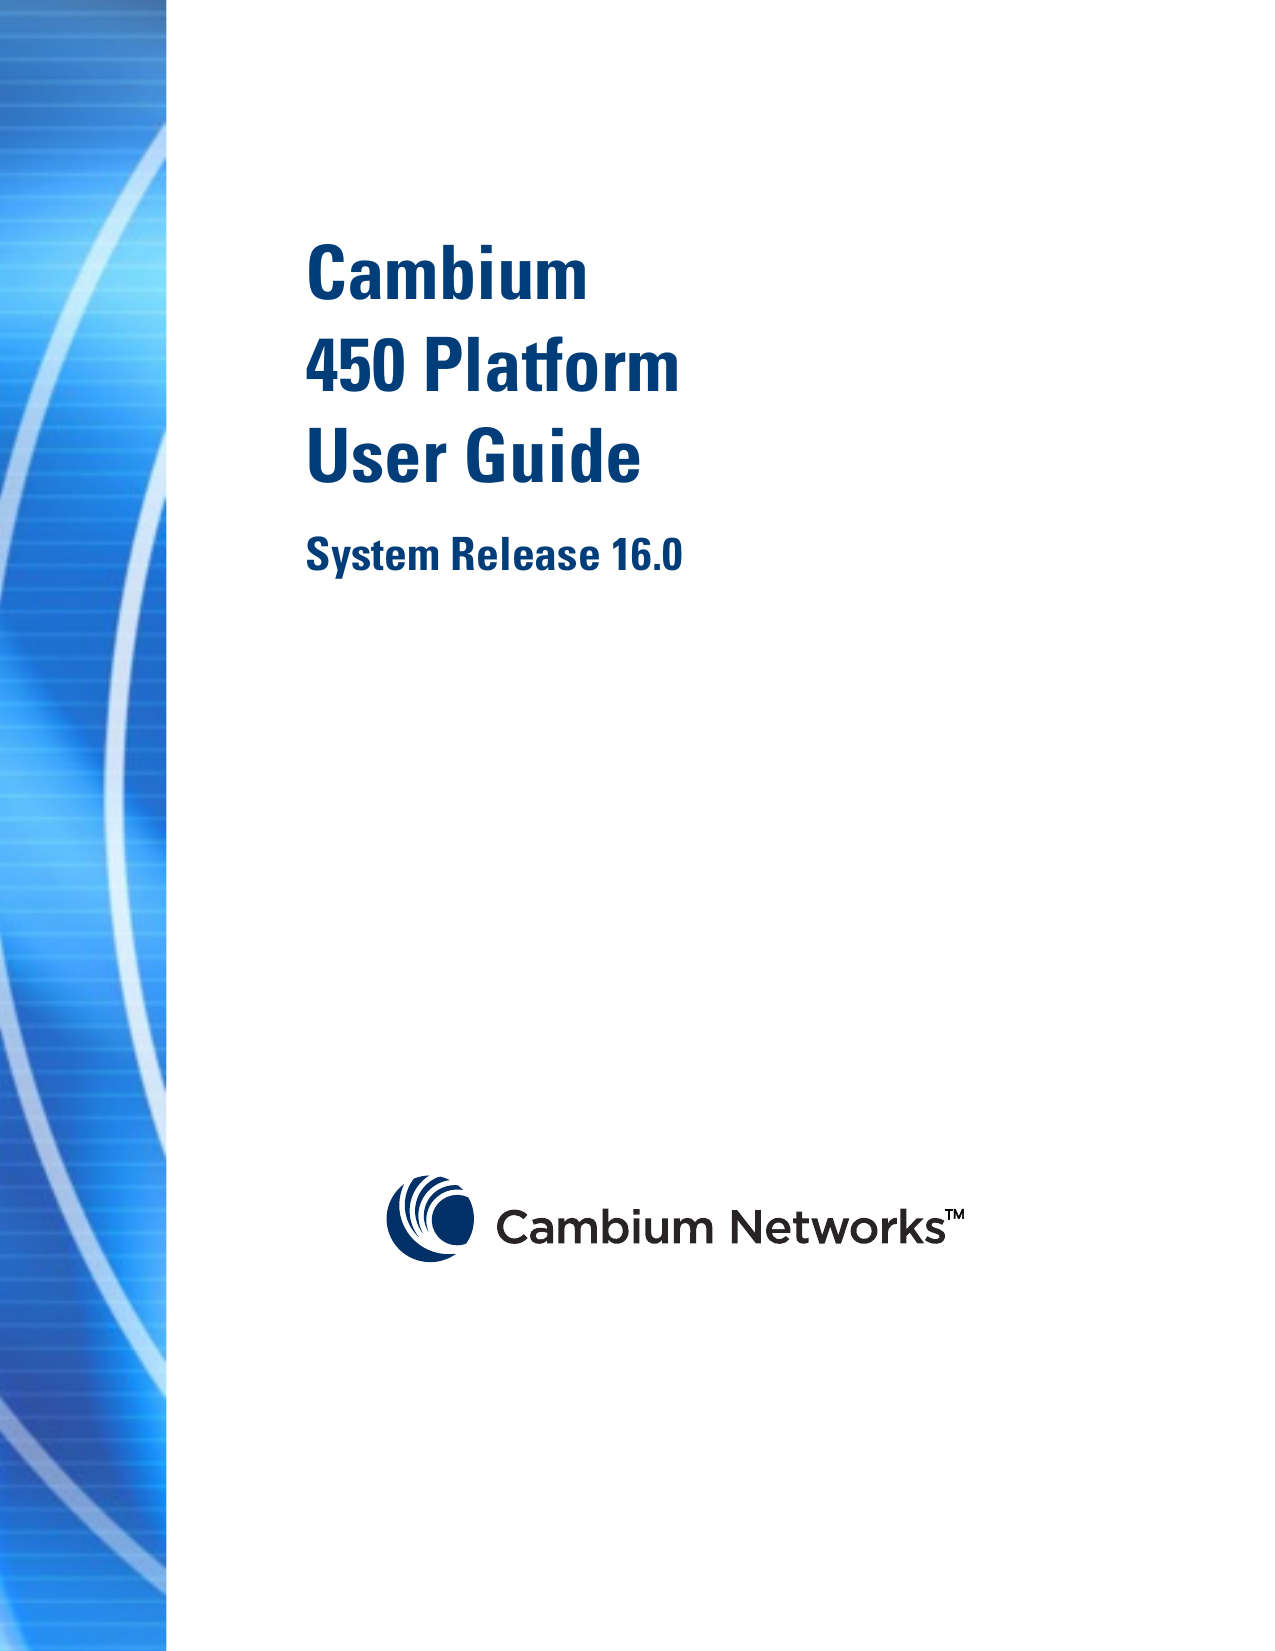  33F  Cambium  450 Platform  User Guide System Release 16.0                   